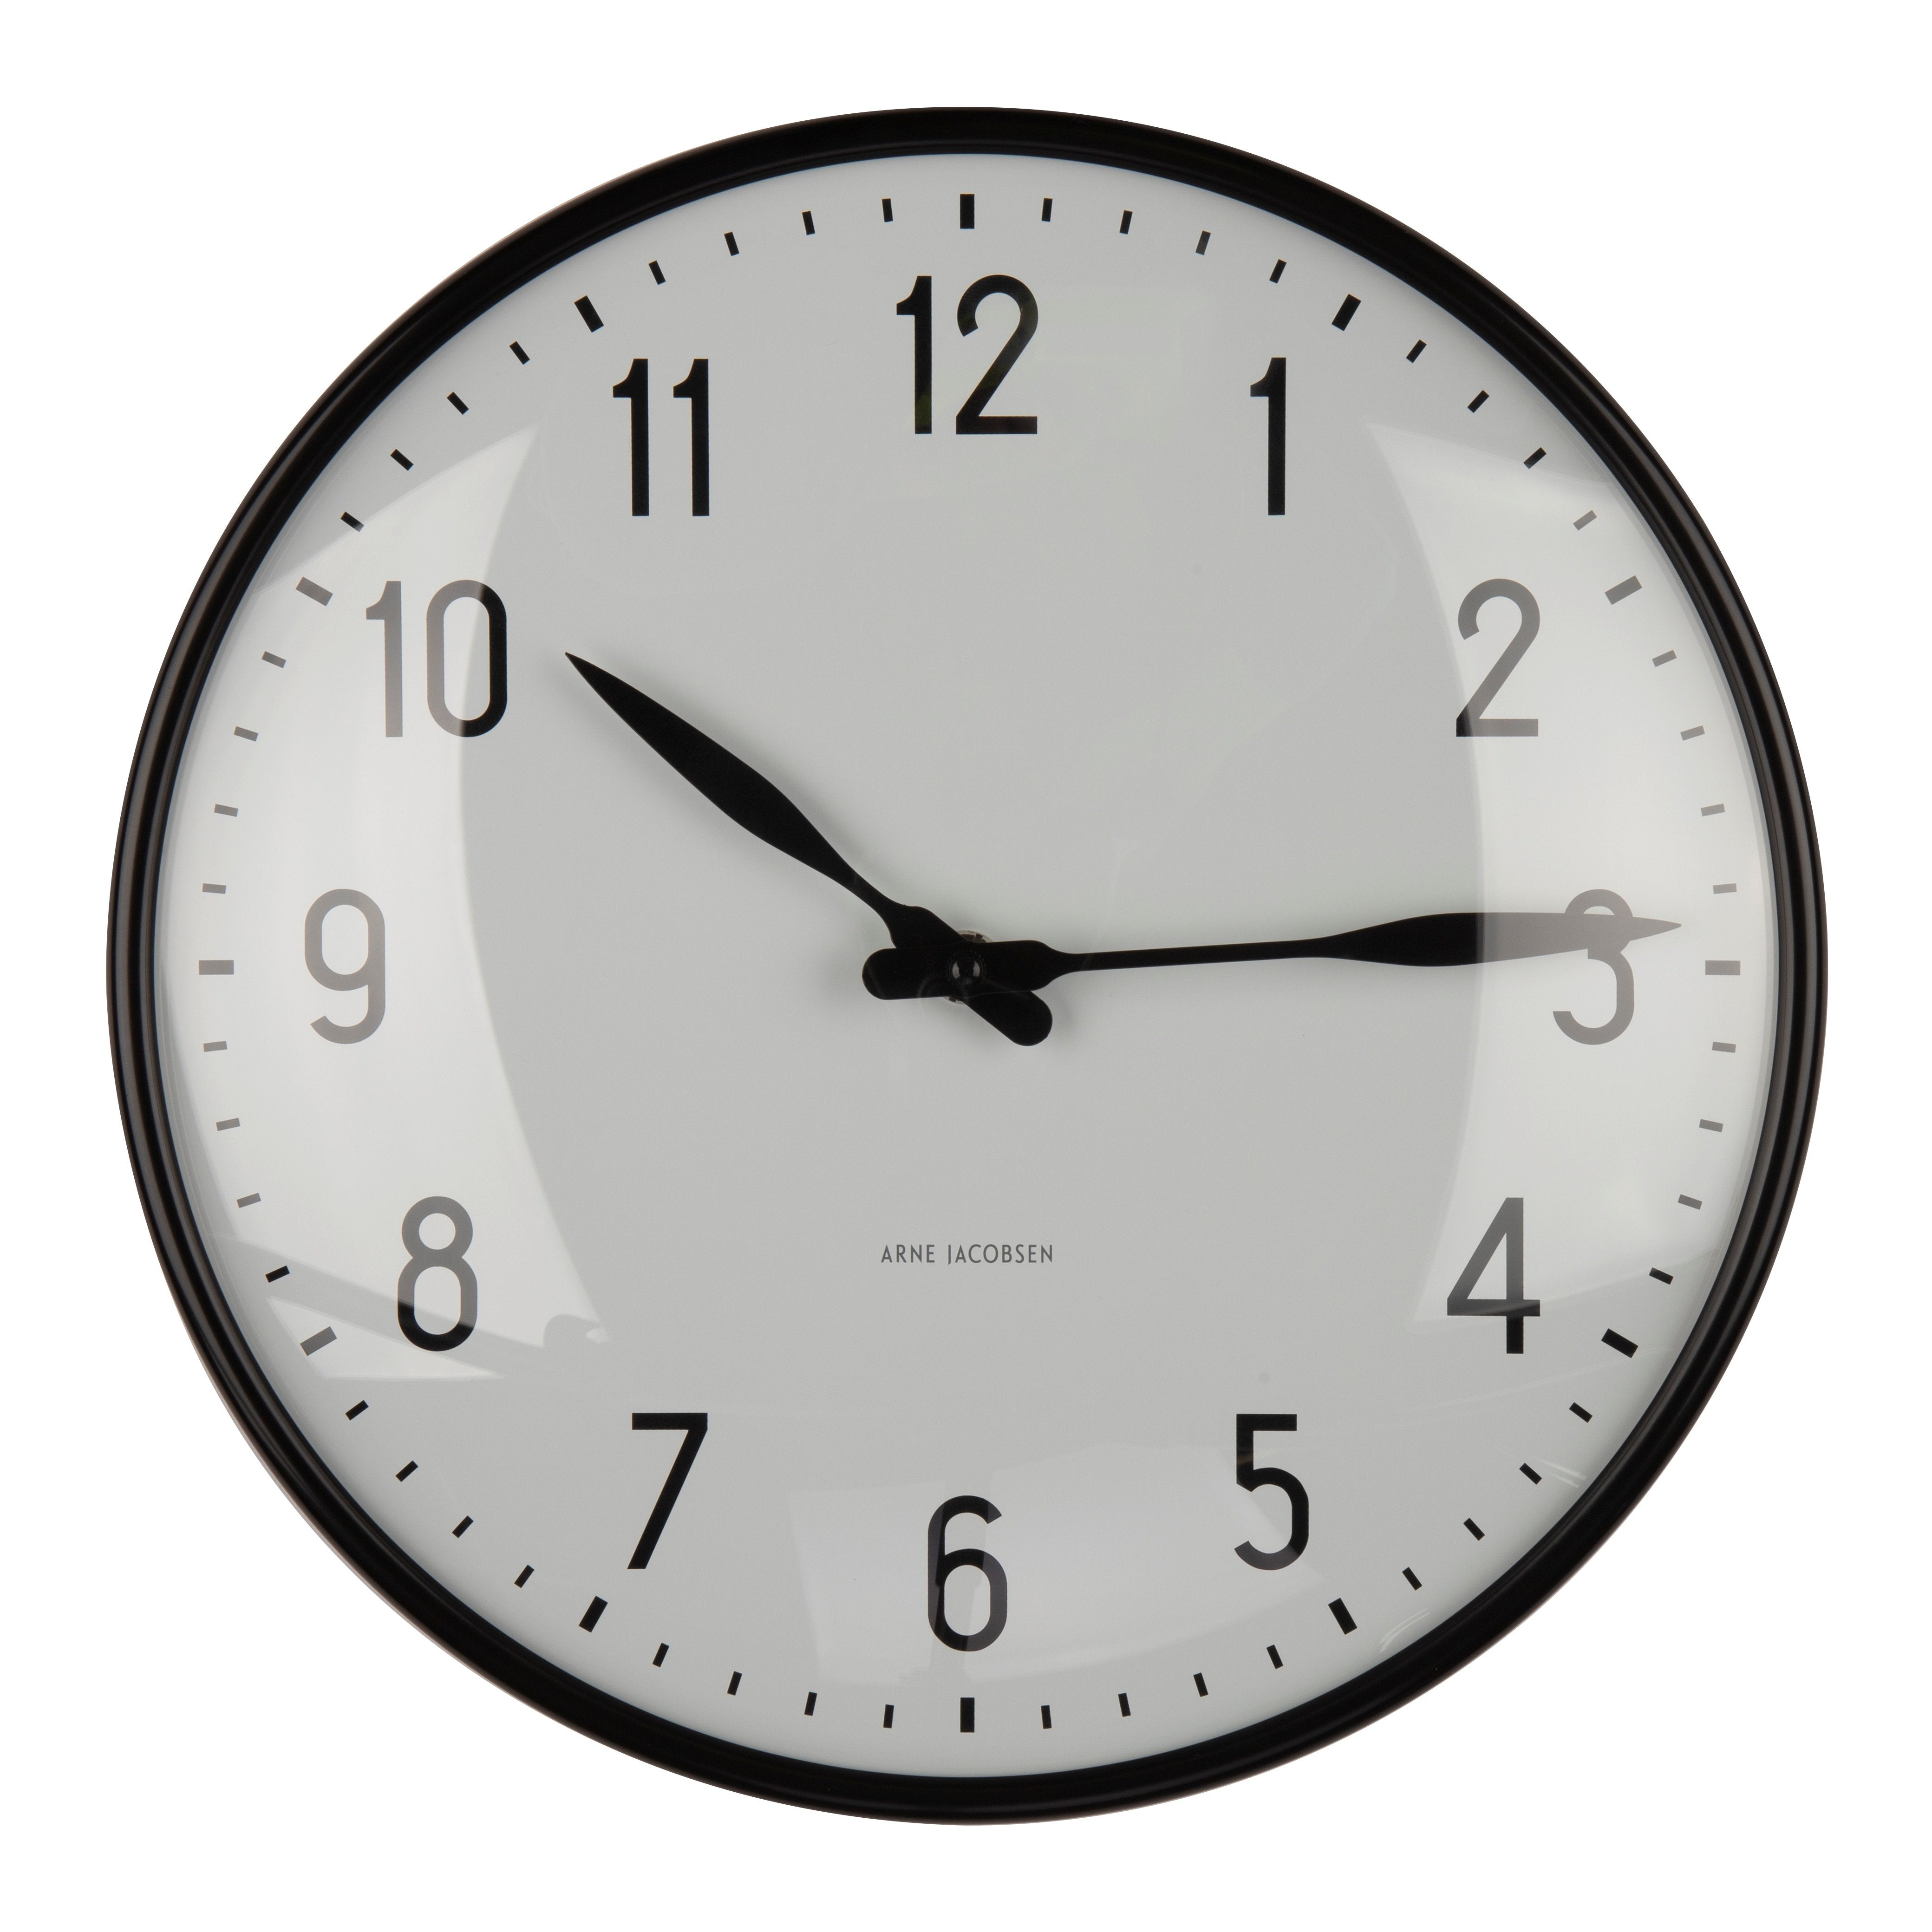 Get Arne Jacobsen Bankers Wall Clock - White | My Euro Mall